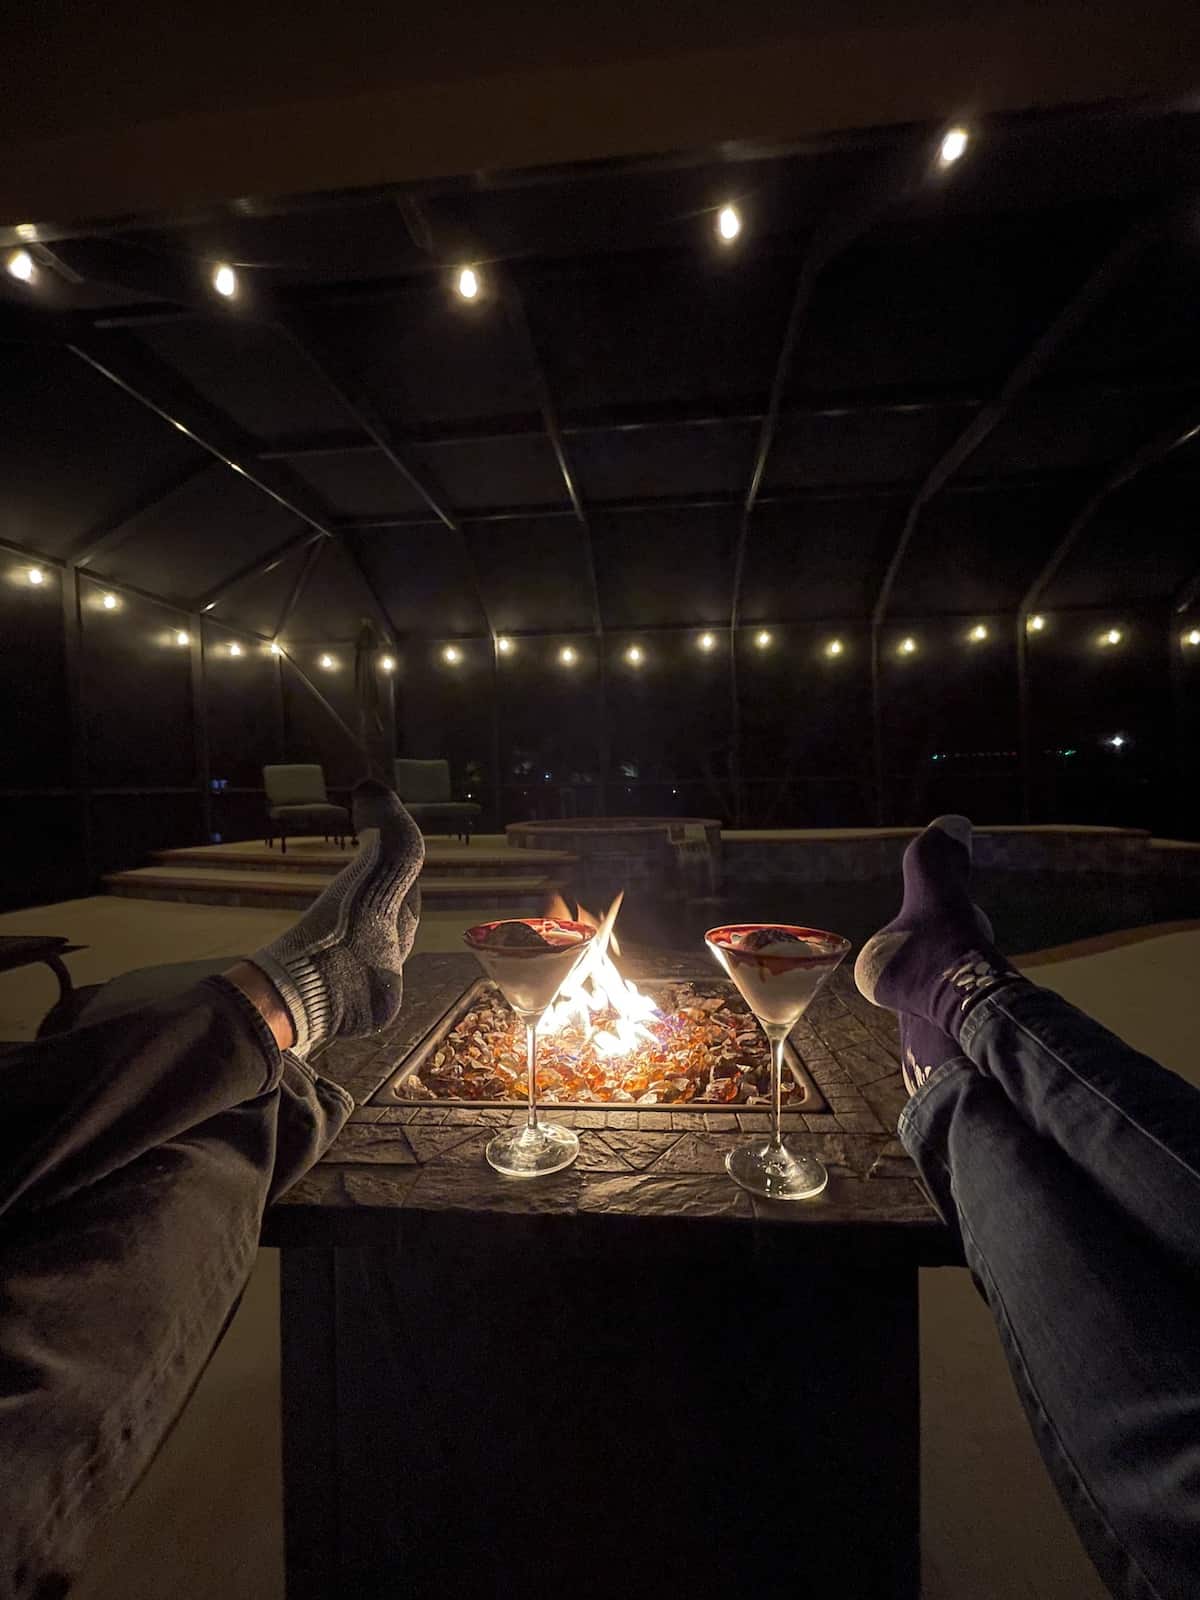 Feet up on fire pit with cocktails.